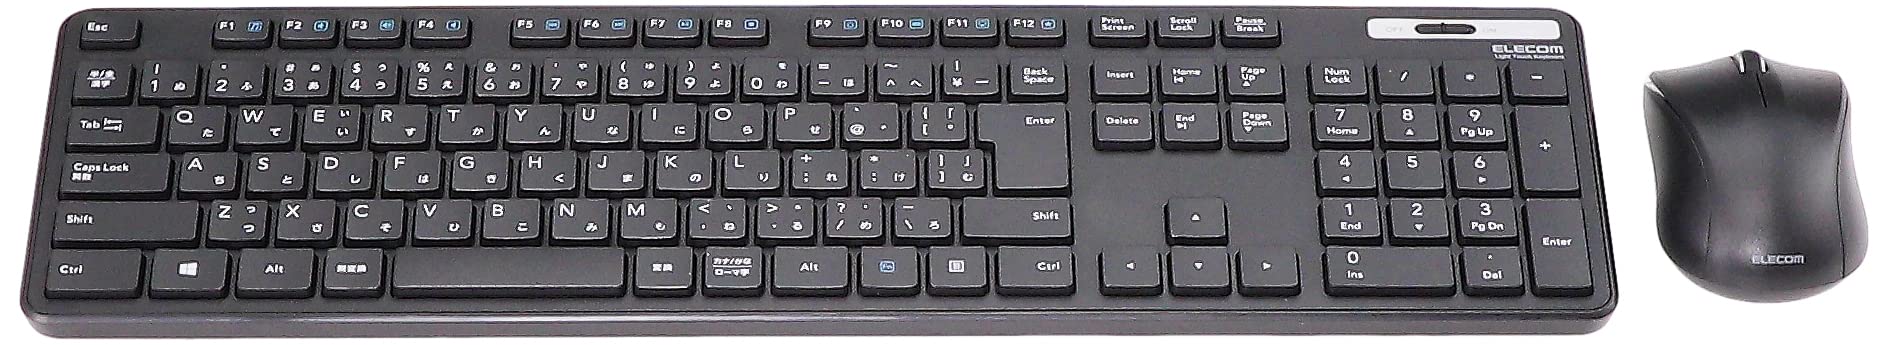 ELECOM Wireless Slim & Thin Keyboard/Standard Japanese Layout in Conformity with JIS Standard, with Numeric Keypad and Wireless Mouse/Black/TK-FDM110MBK